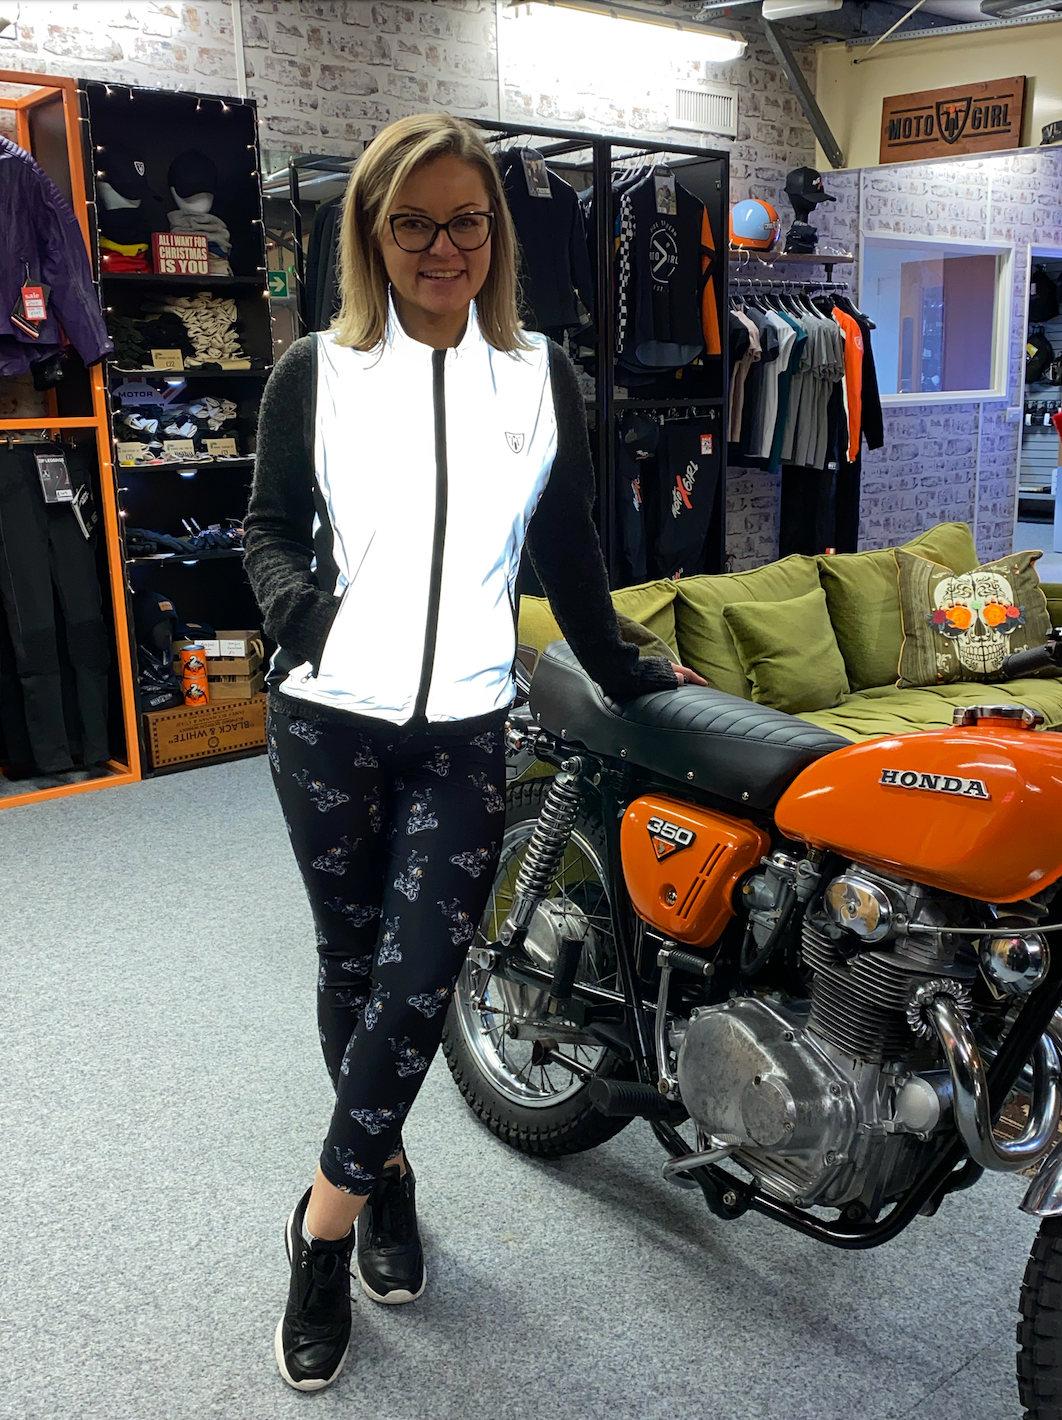 A blond smiling woman leaning on a motorcycle  wearing reflective vest